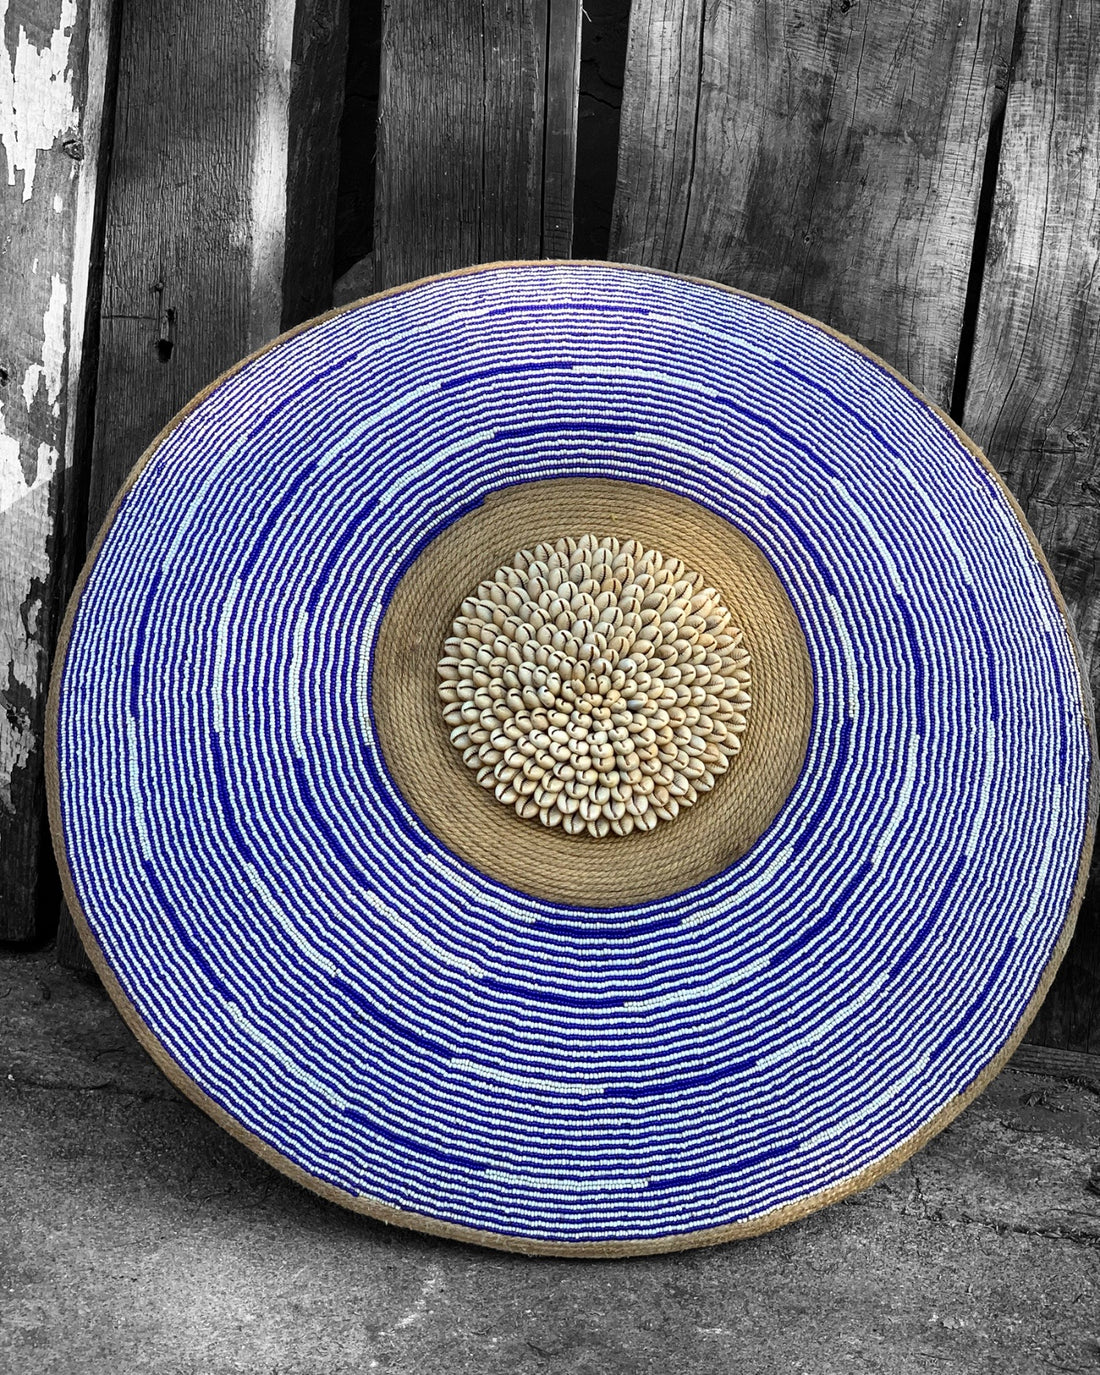 African Beaded Shield - Blue Mesh - eyahomeliving